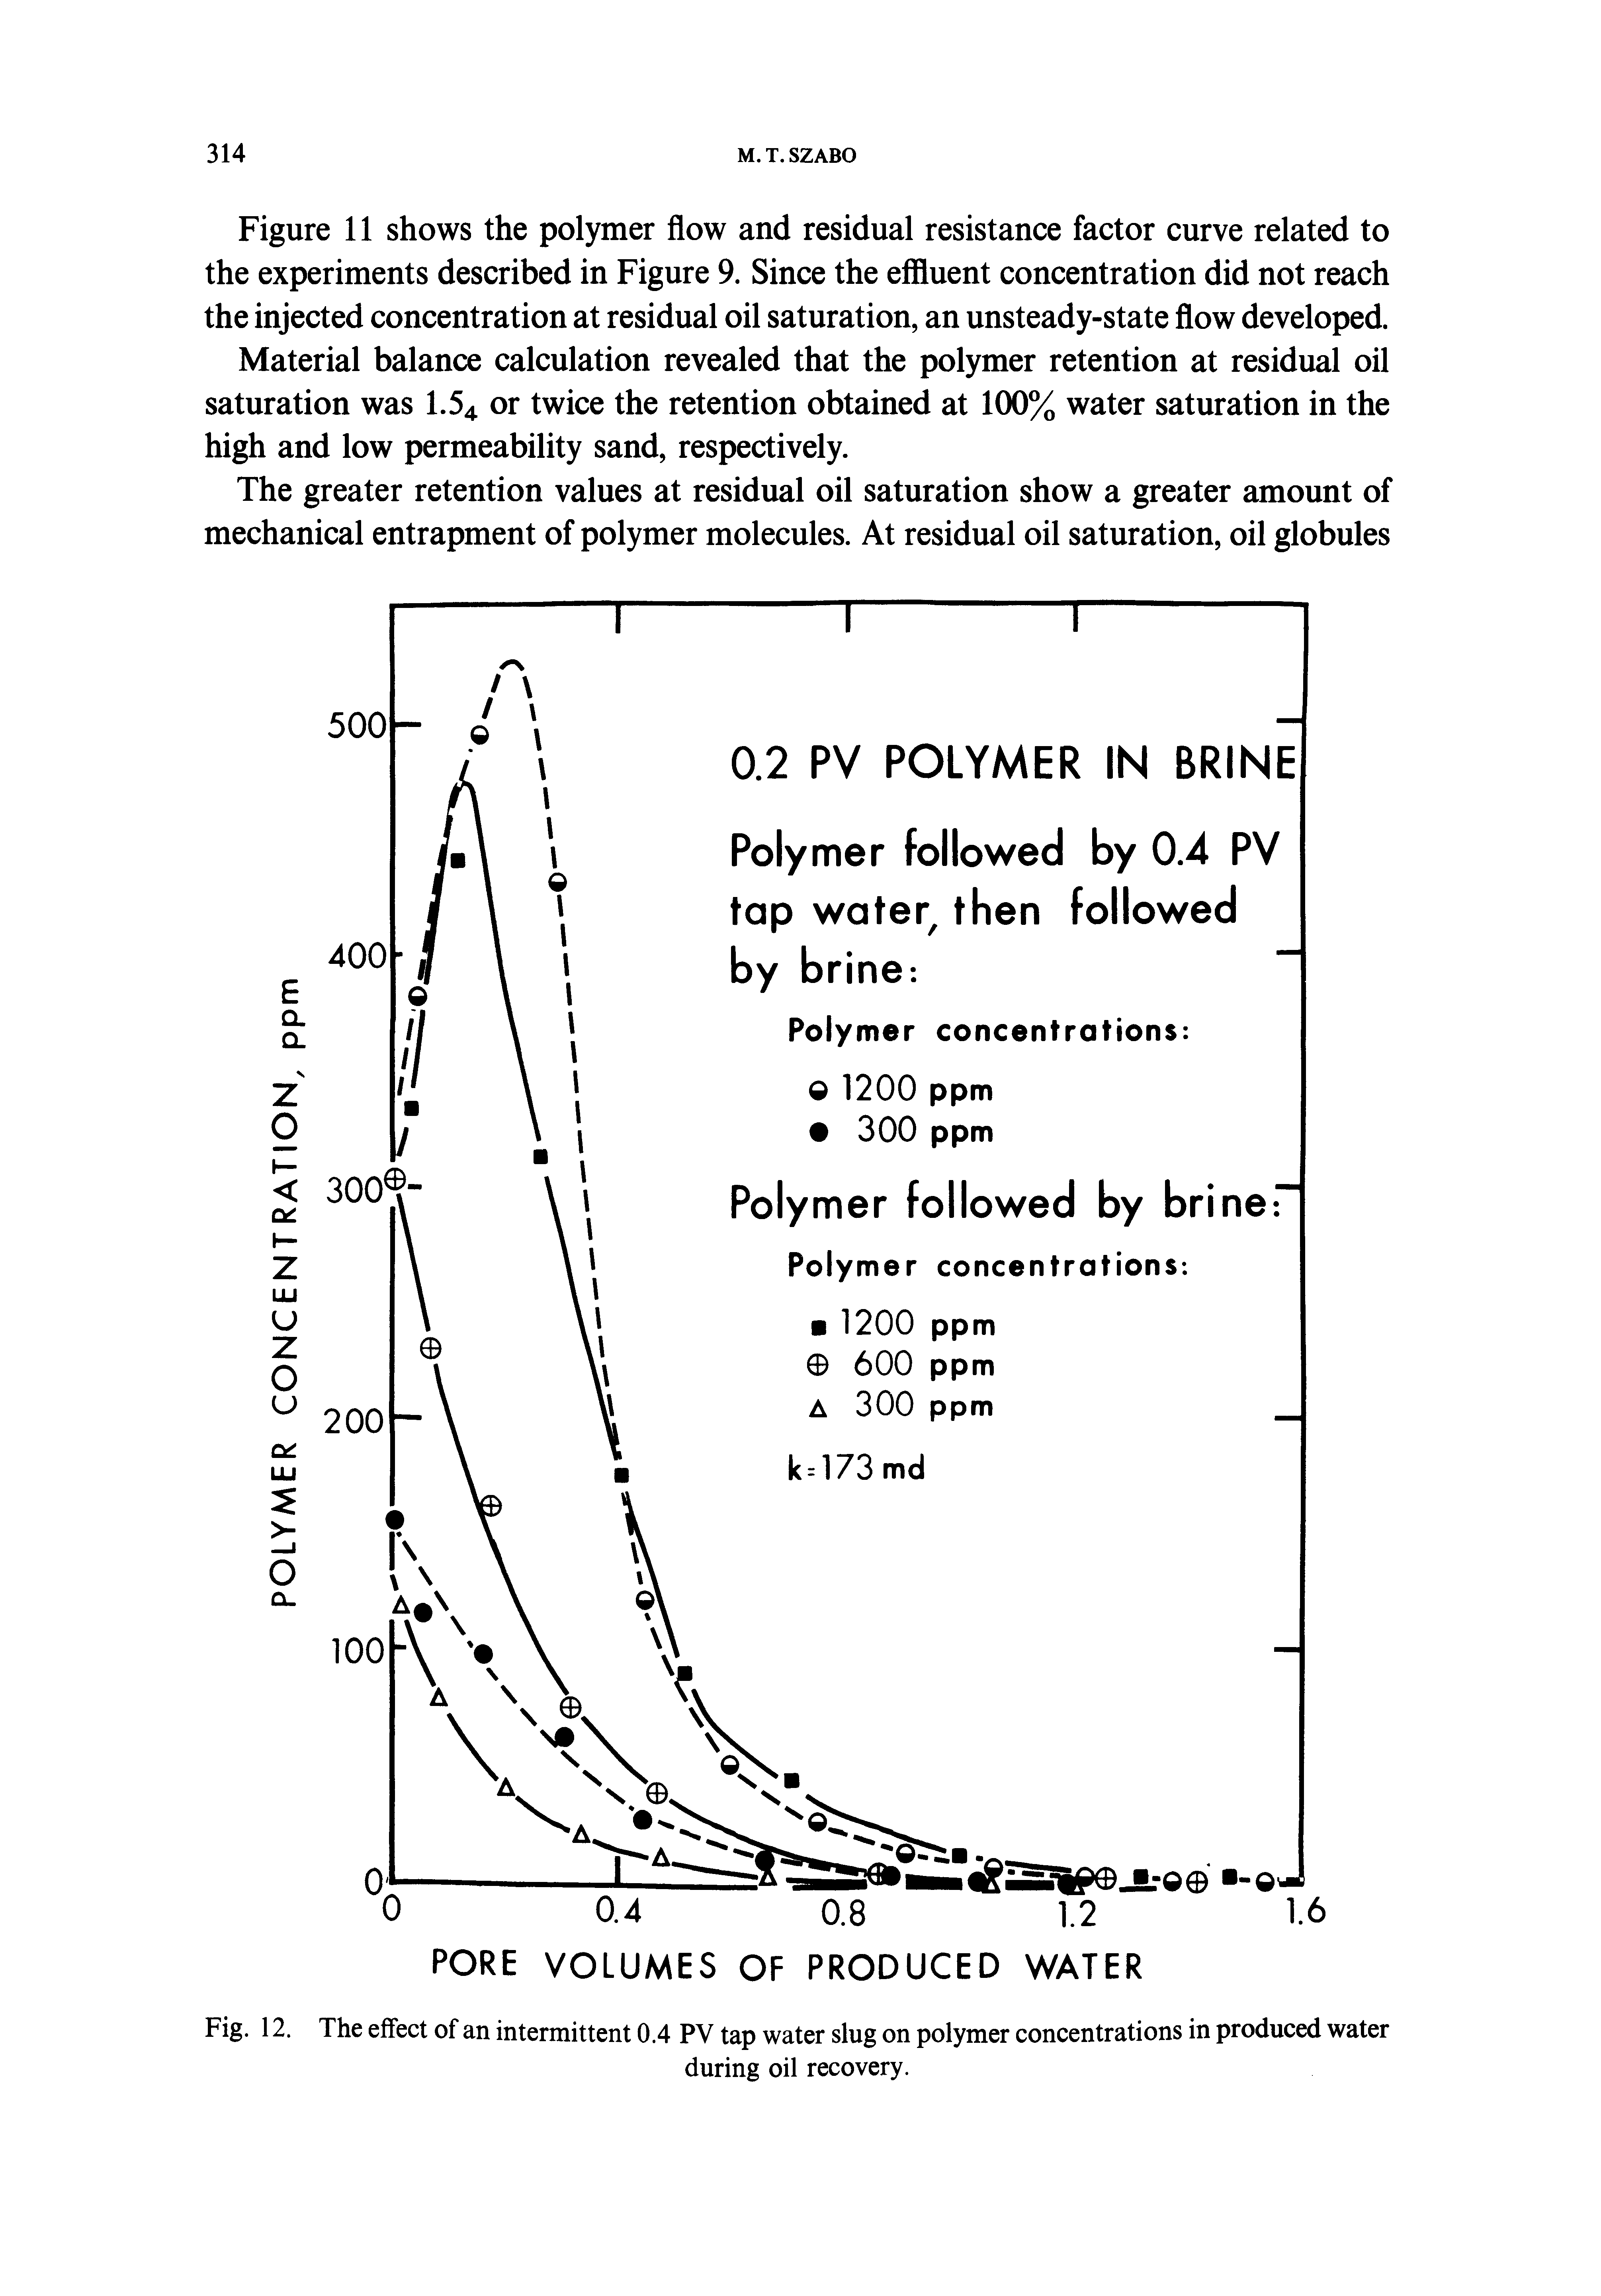 Figure 11 shows the polymer flow and residual resistance factor curve related to the experiments described in Figure 9. Since the effluent concentration did not reach the injected concentration at residual oil saturation, an unsteady-state flow developed.